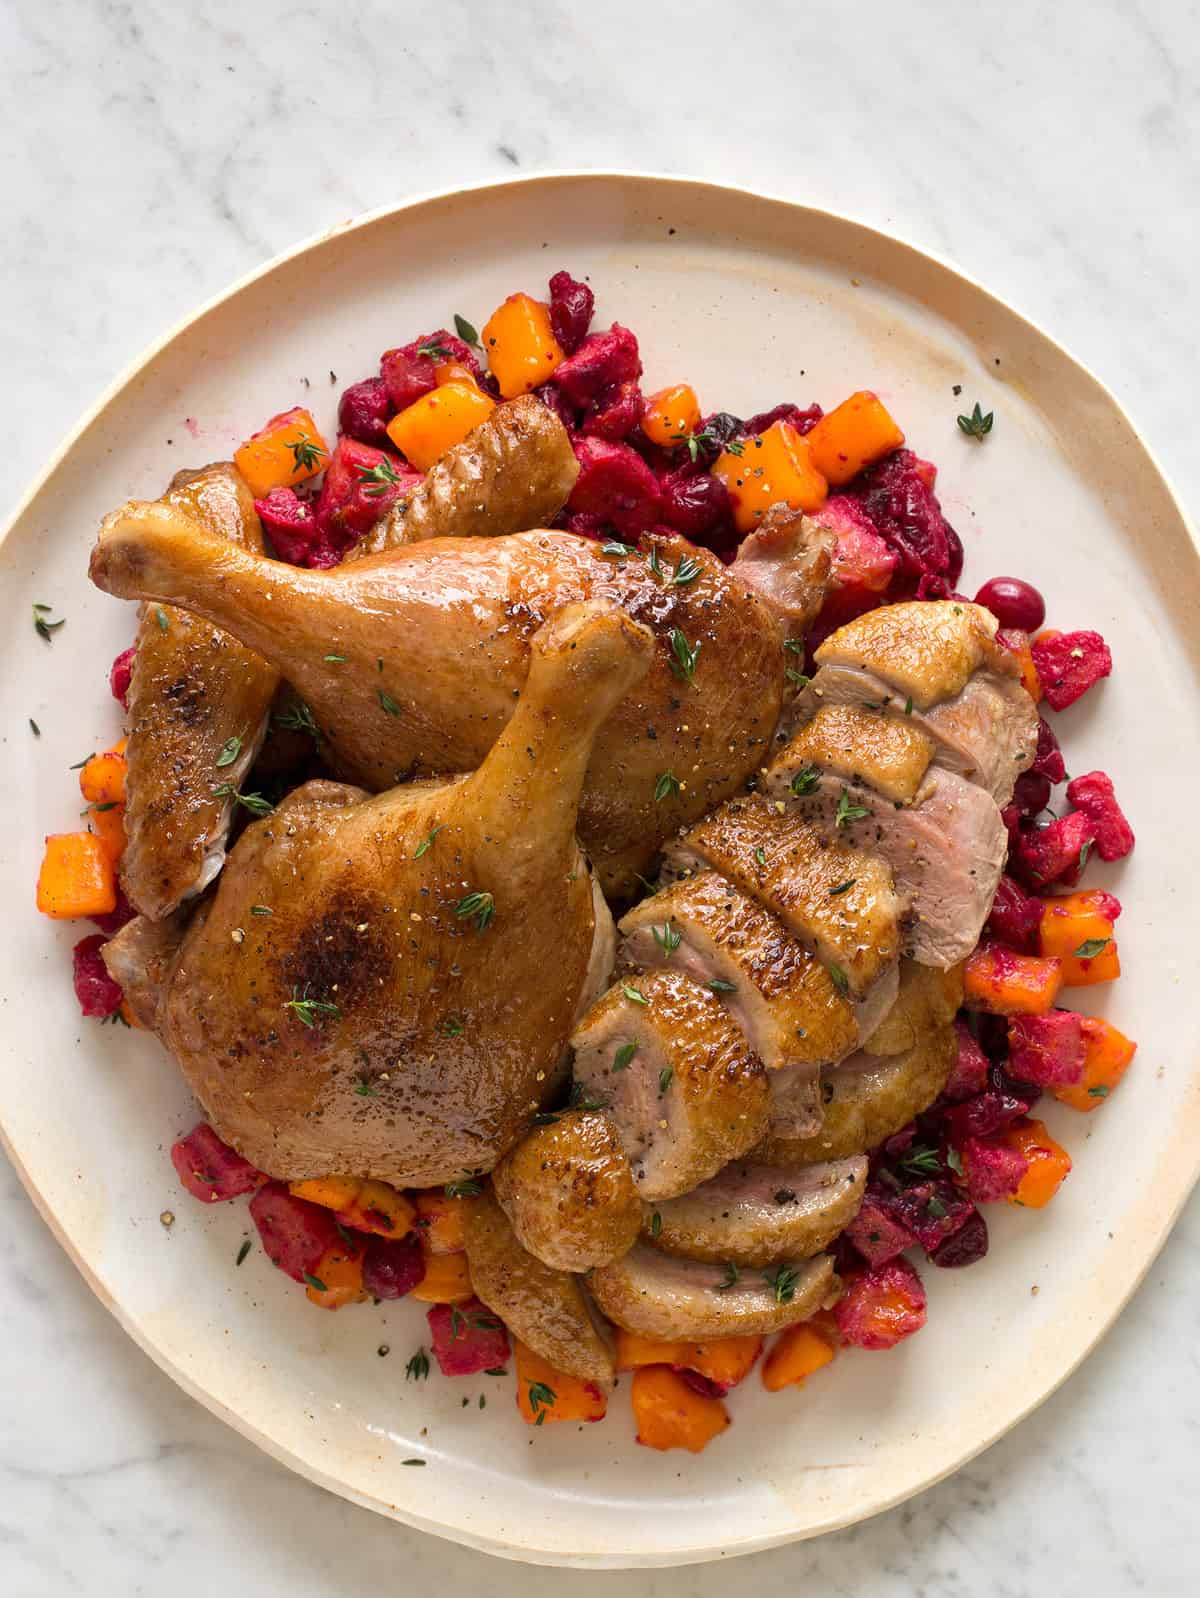 Maple Balsamic Roasted Duck